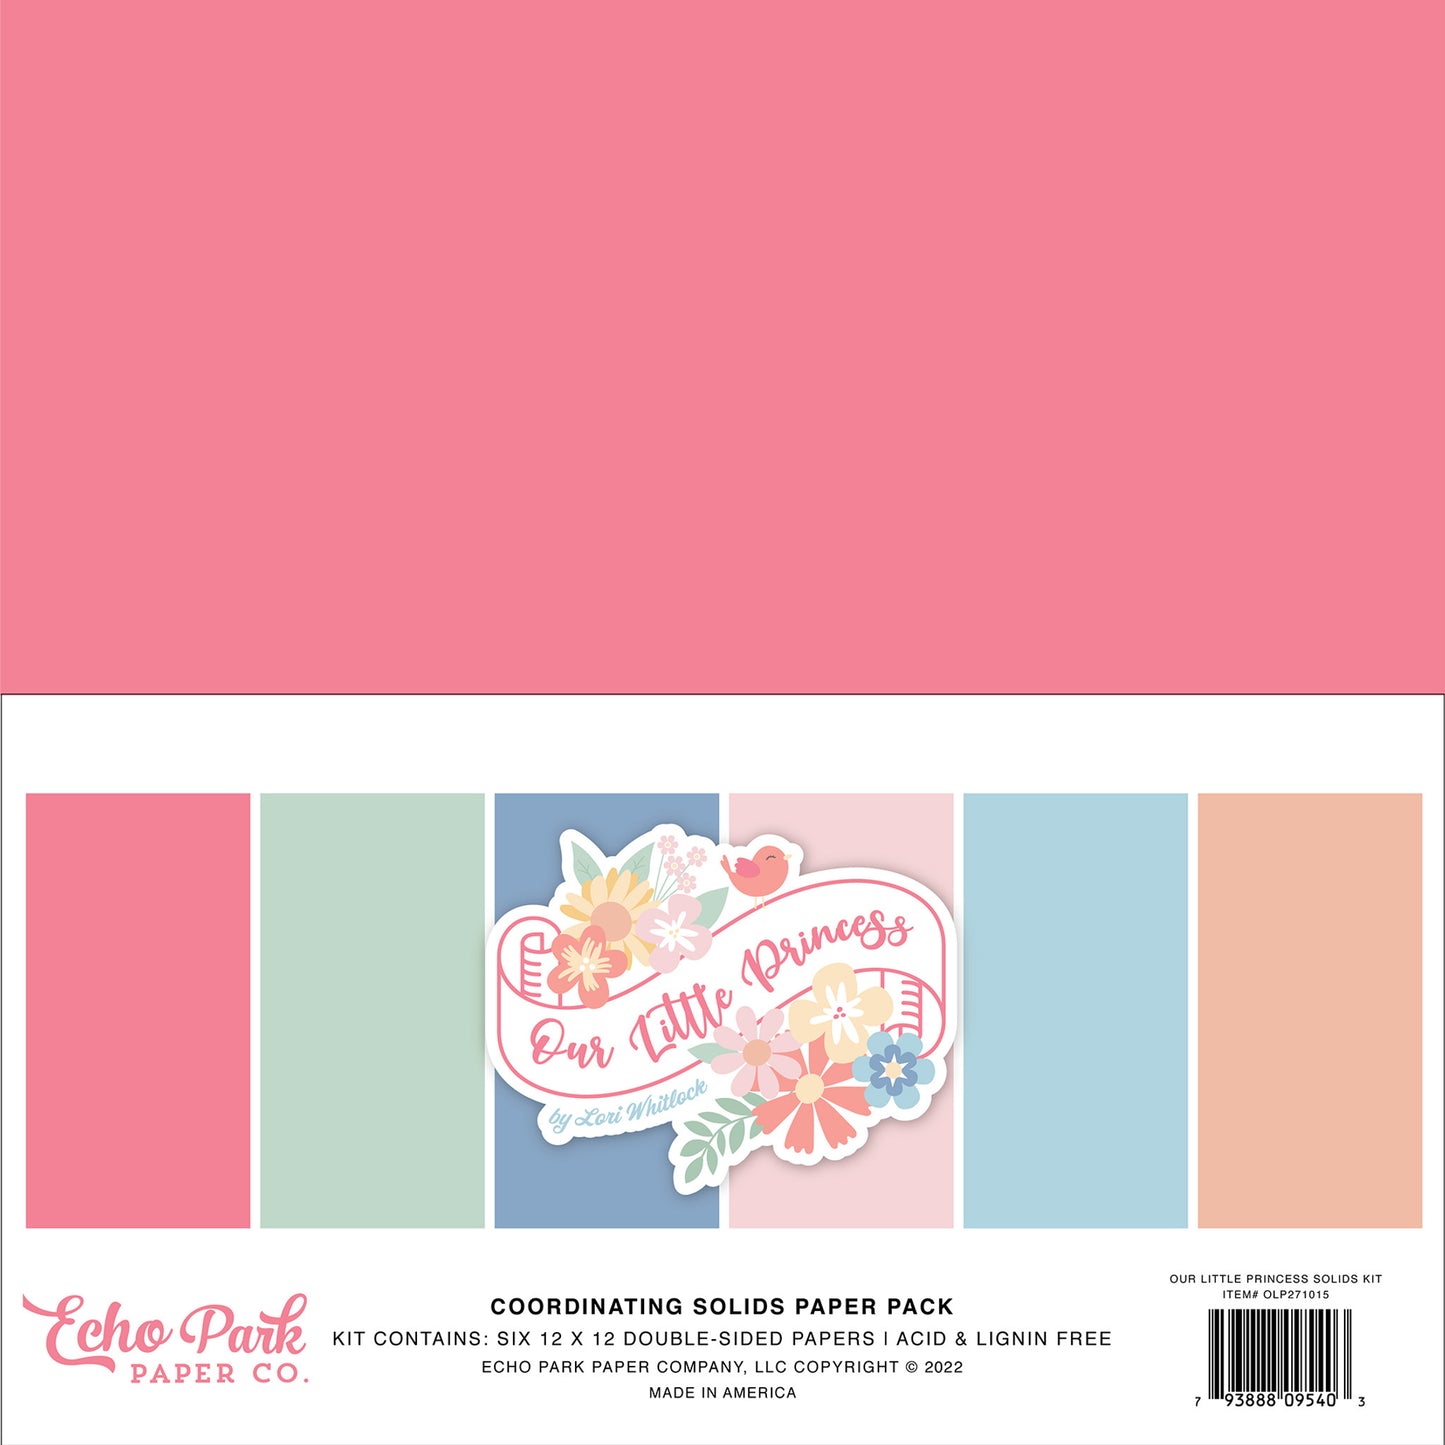 Our Little Princess . Coordinating Solids Paper Pack